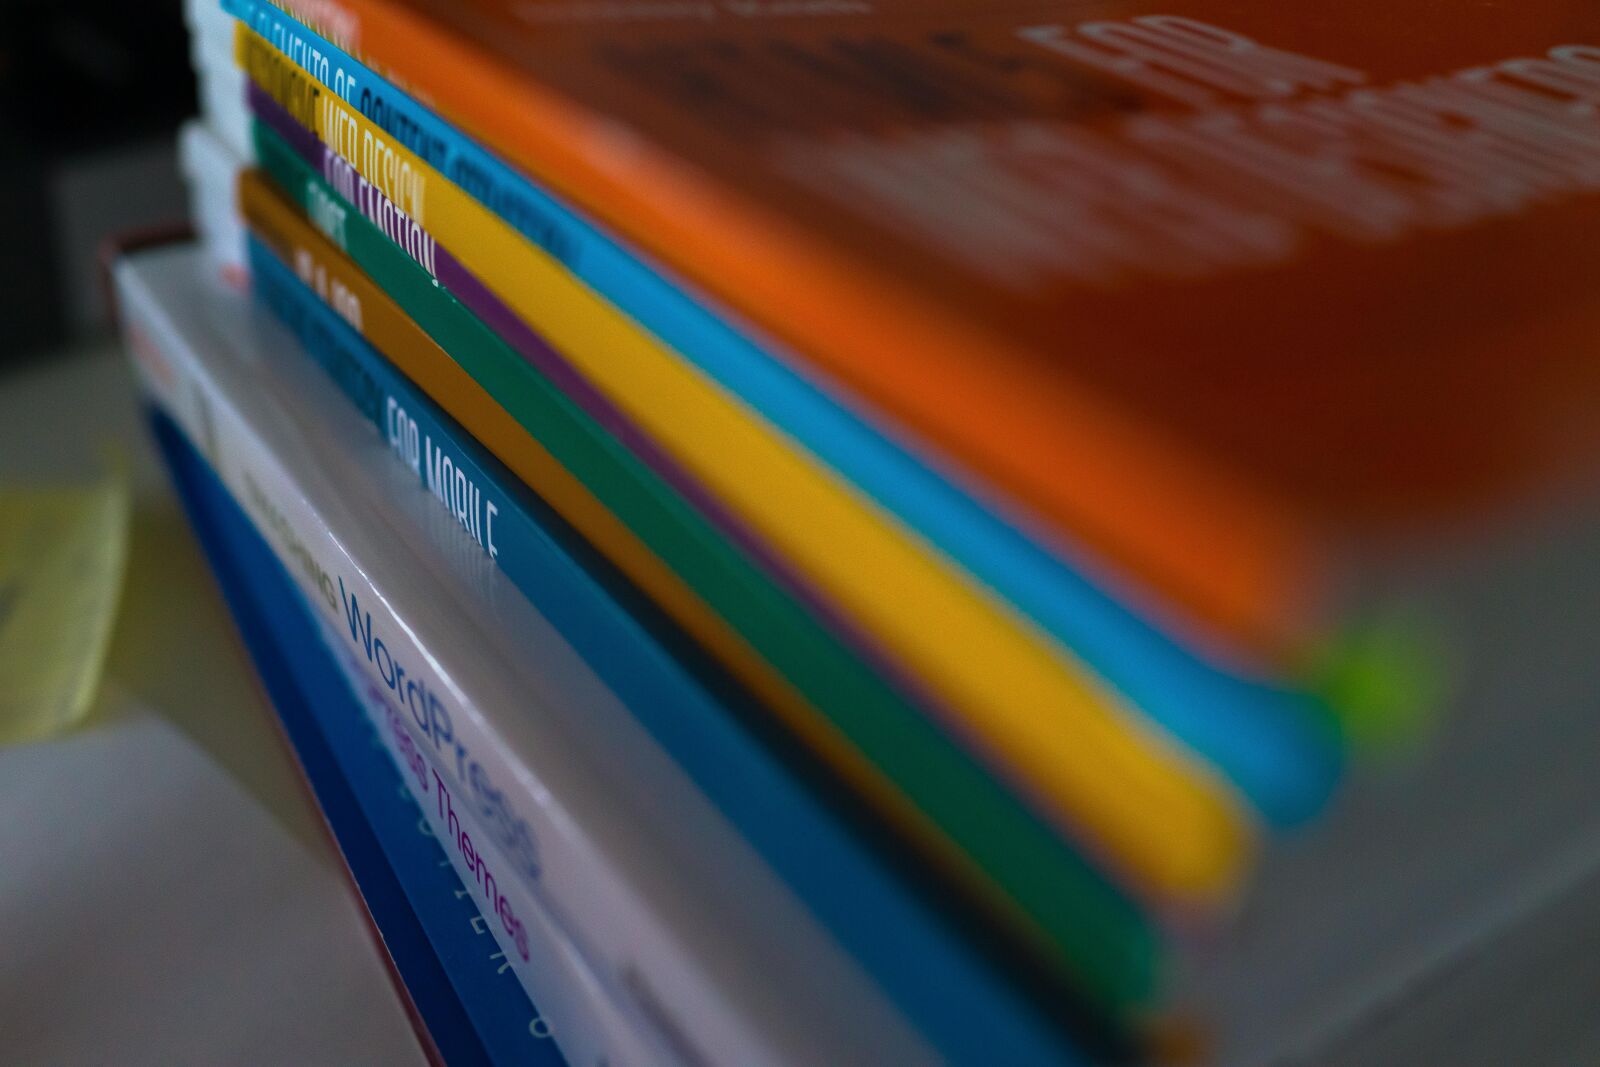 35mm F2.0 sample photo. Books, book stack, colorful photography